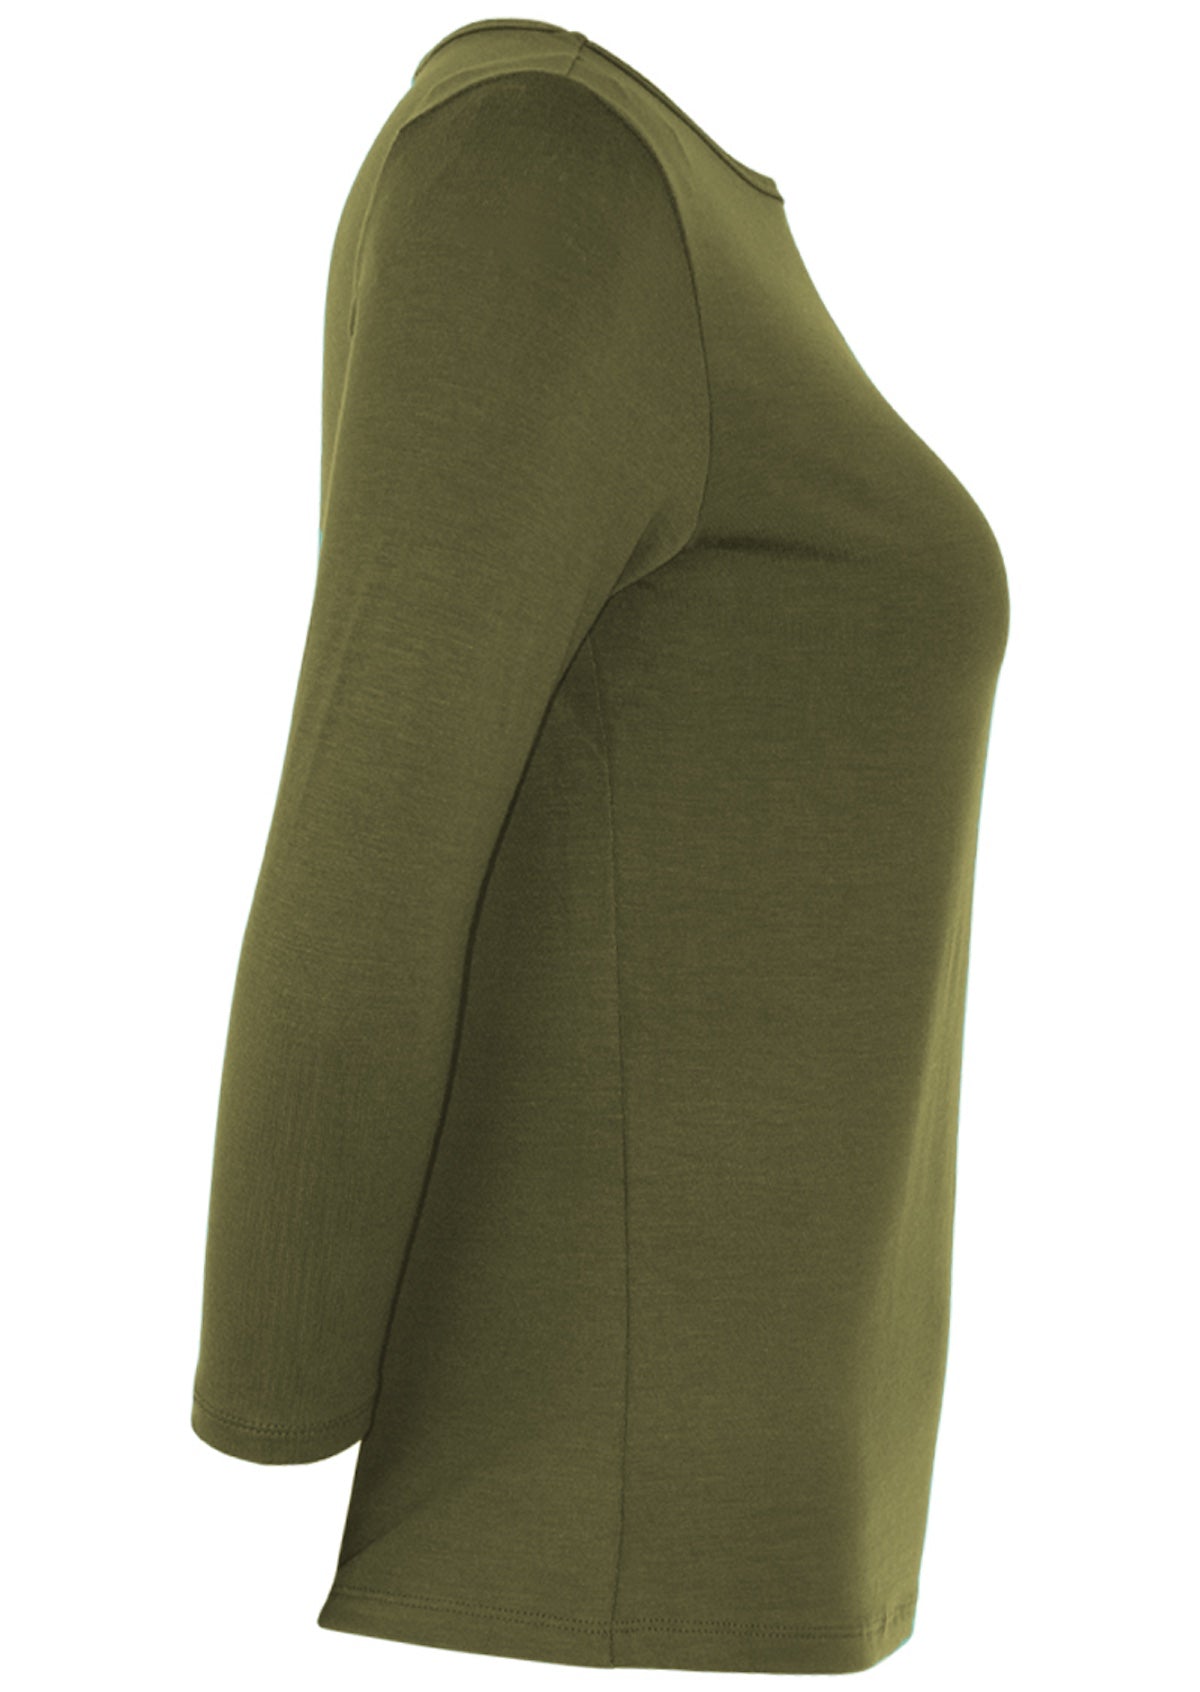 Side view of women's rayon boat neck olive green 3/4 sleeve top.